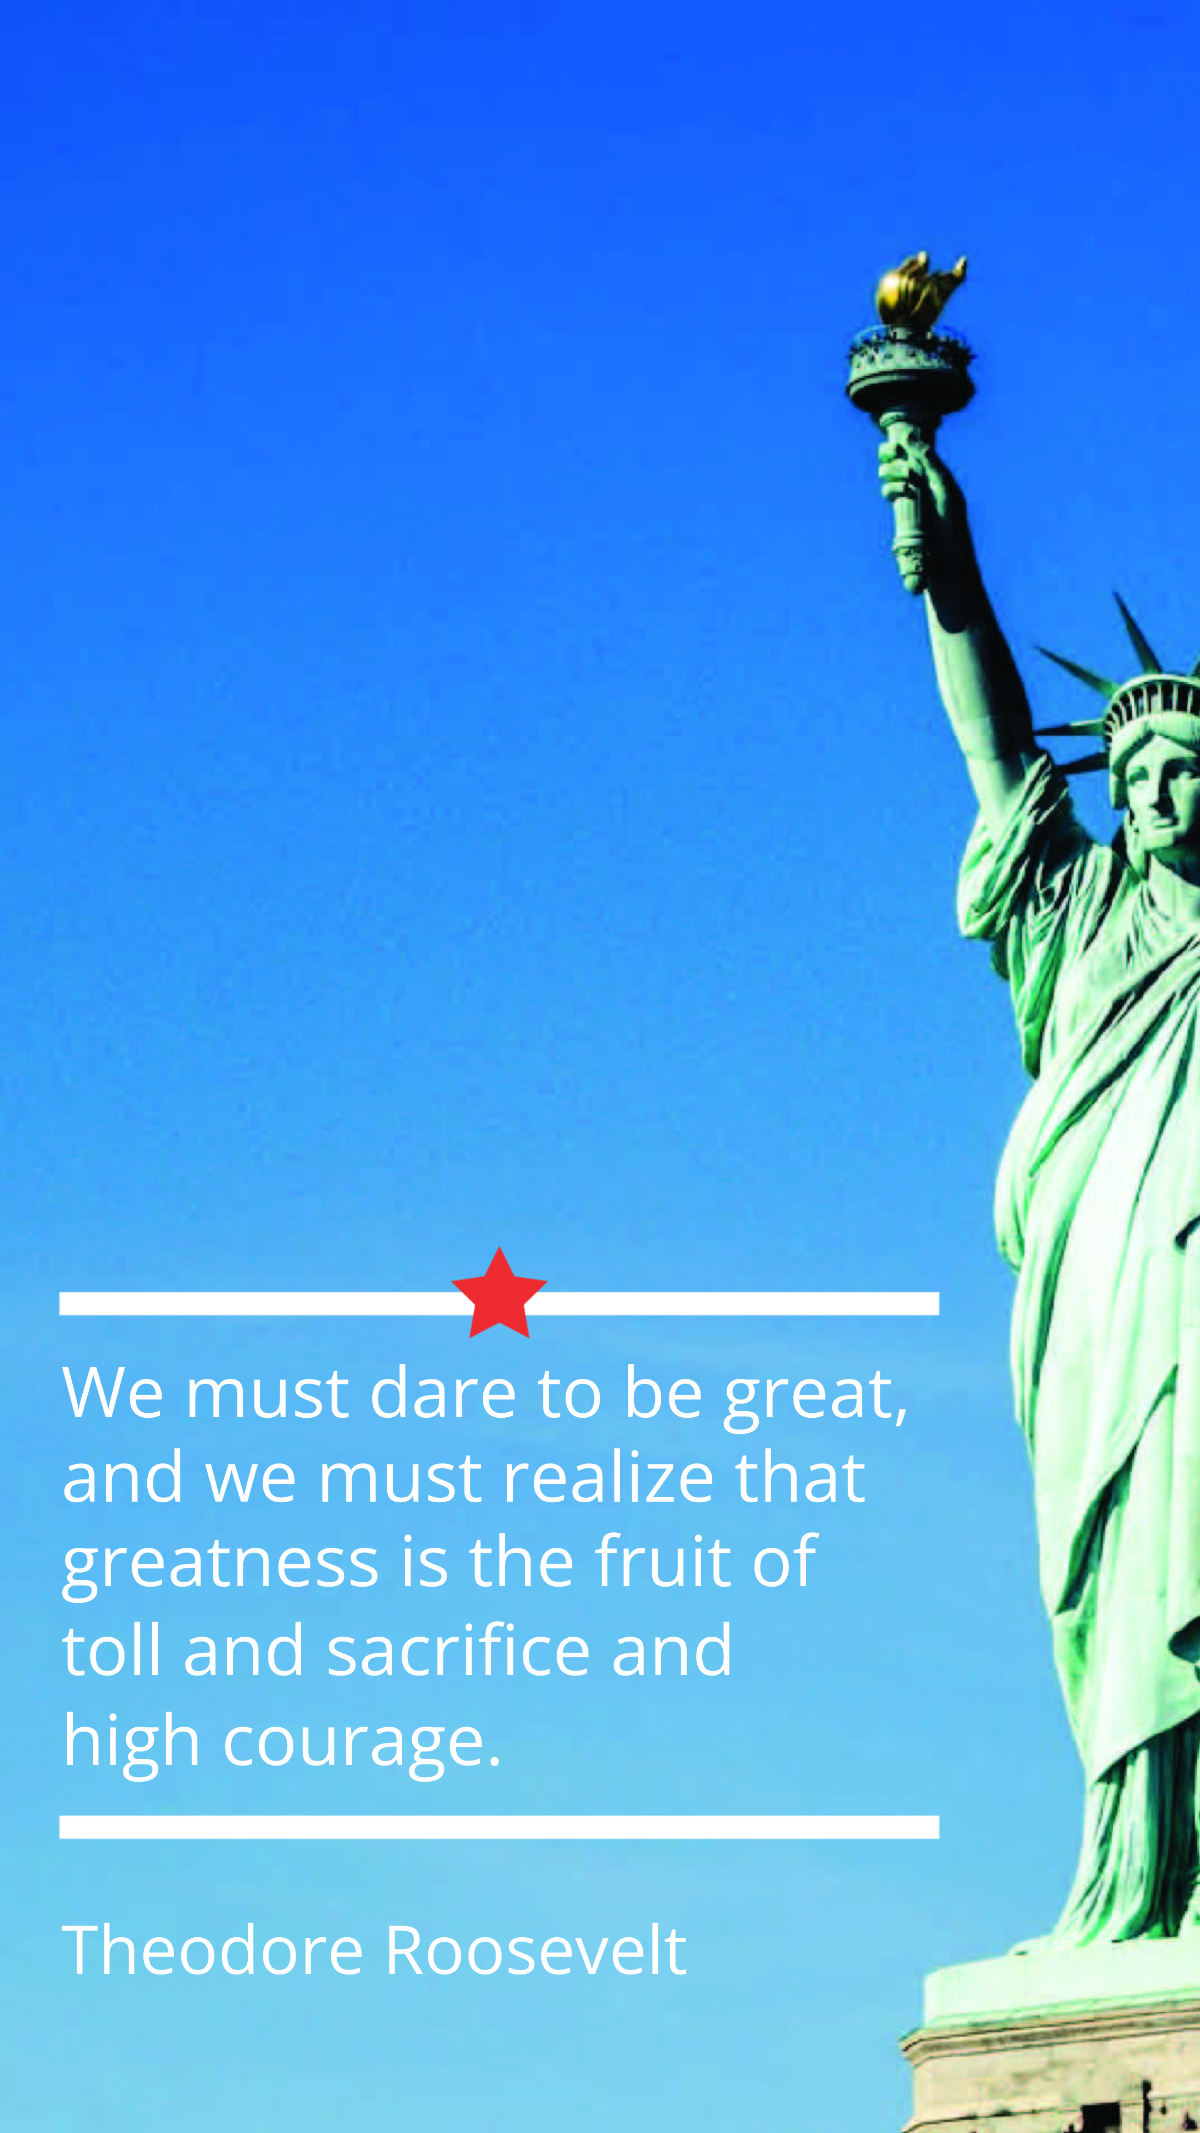 Theodore Roosevelt - We must dare to be great, and we must realize that greatness is the fruit of toll and sacrifice and high courage. Template